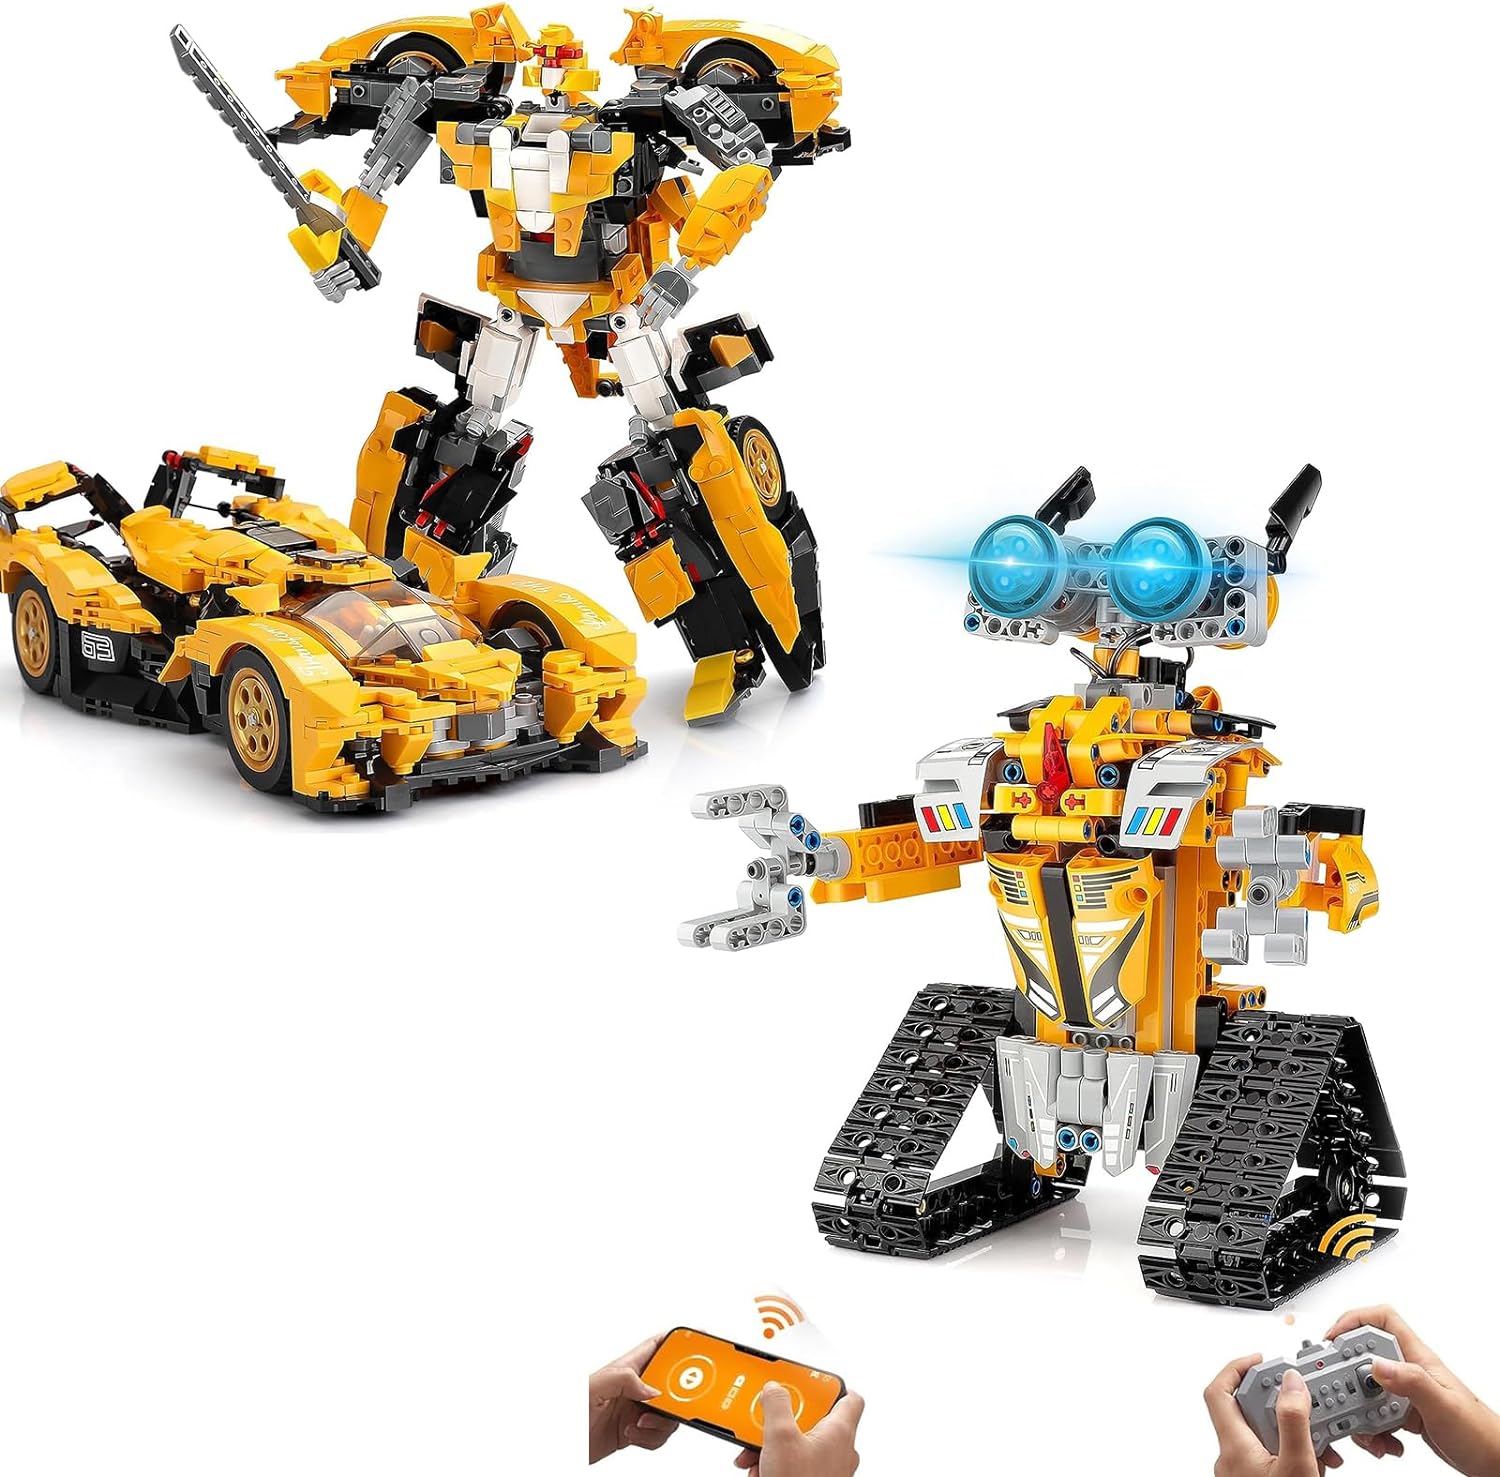 Sillbird Bundle - 2 Items: Remote & APP Controlled Robot Building kit Toys Gifts for Boys Girls Age 8 , 2in1 Transforming Robot & Technic Racing Car Construction Blocks Kit